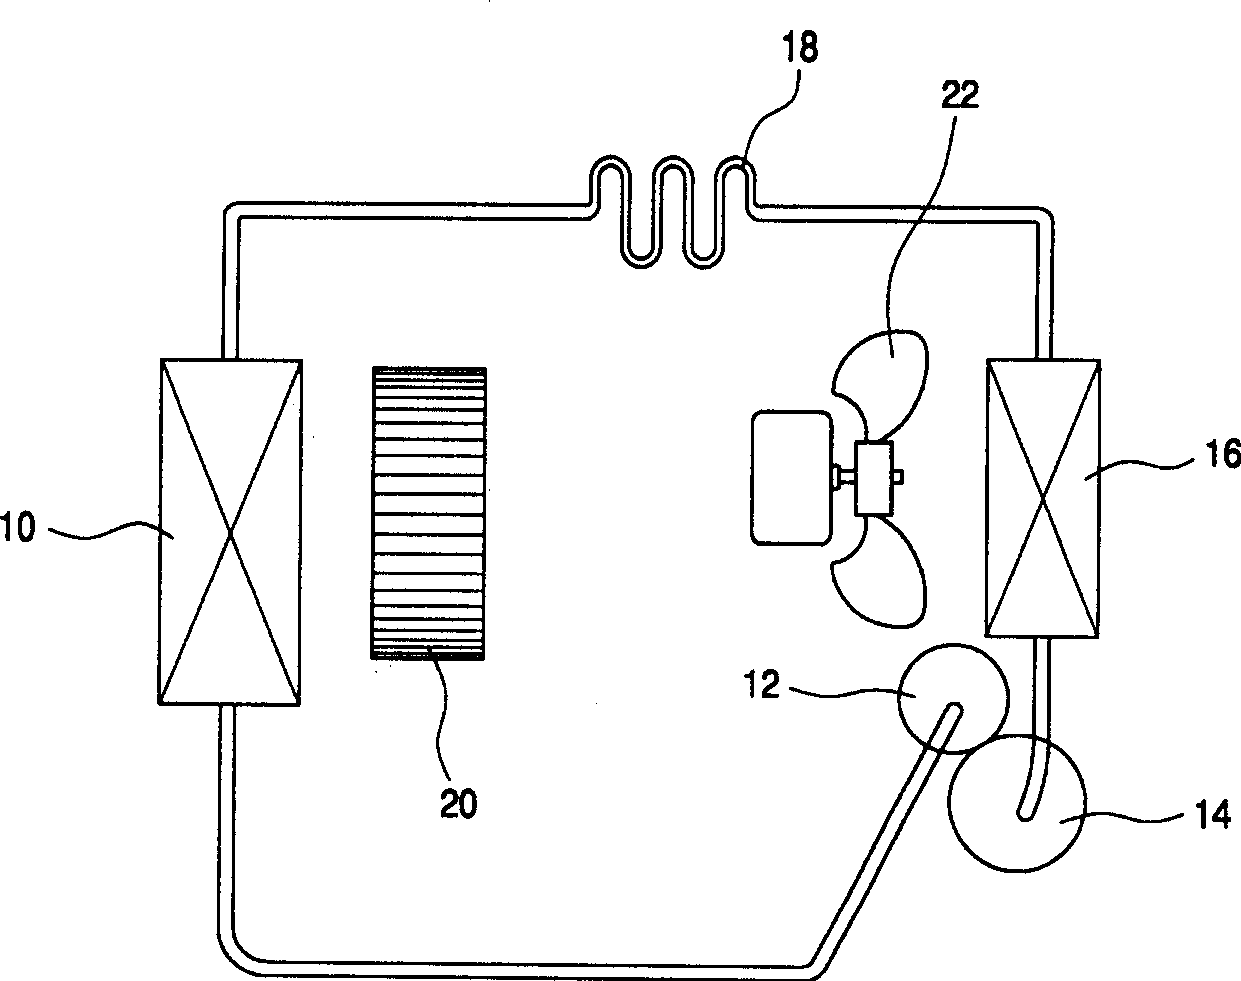 Air conditioner having thermostatic and dehumidifying functions and its operating method